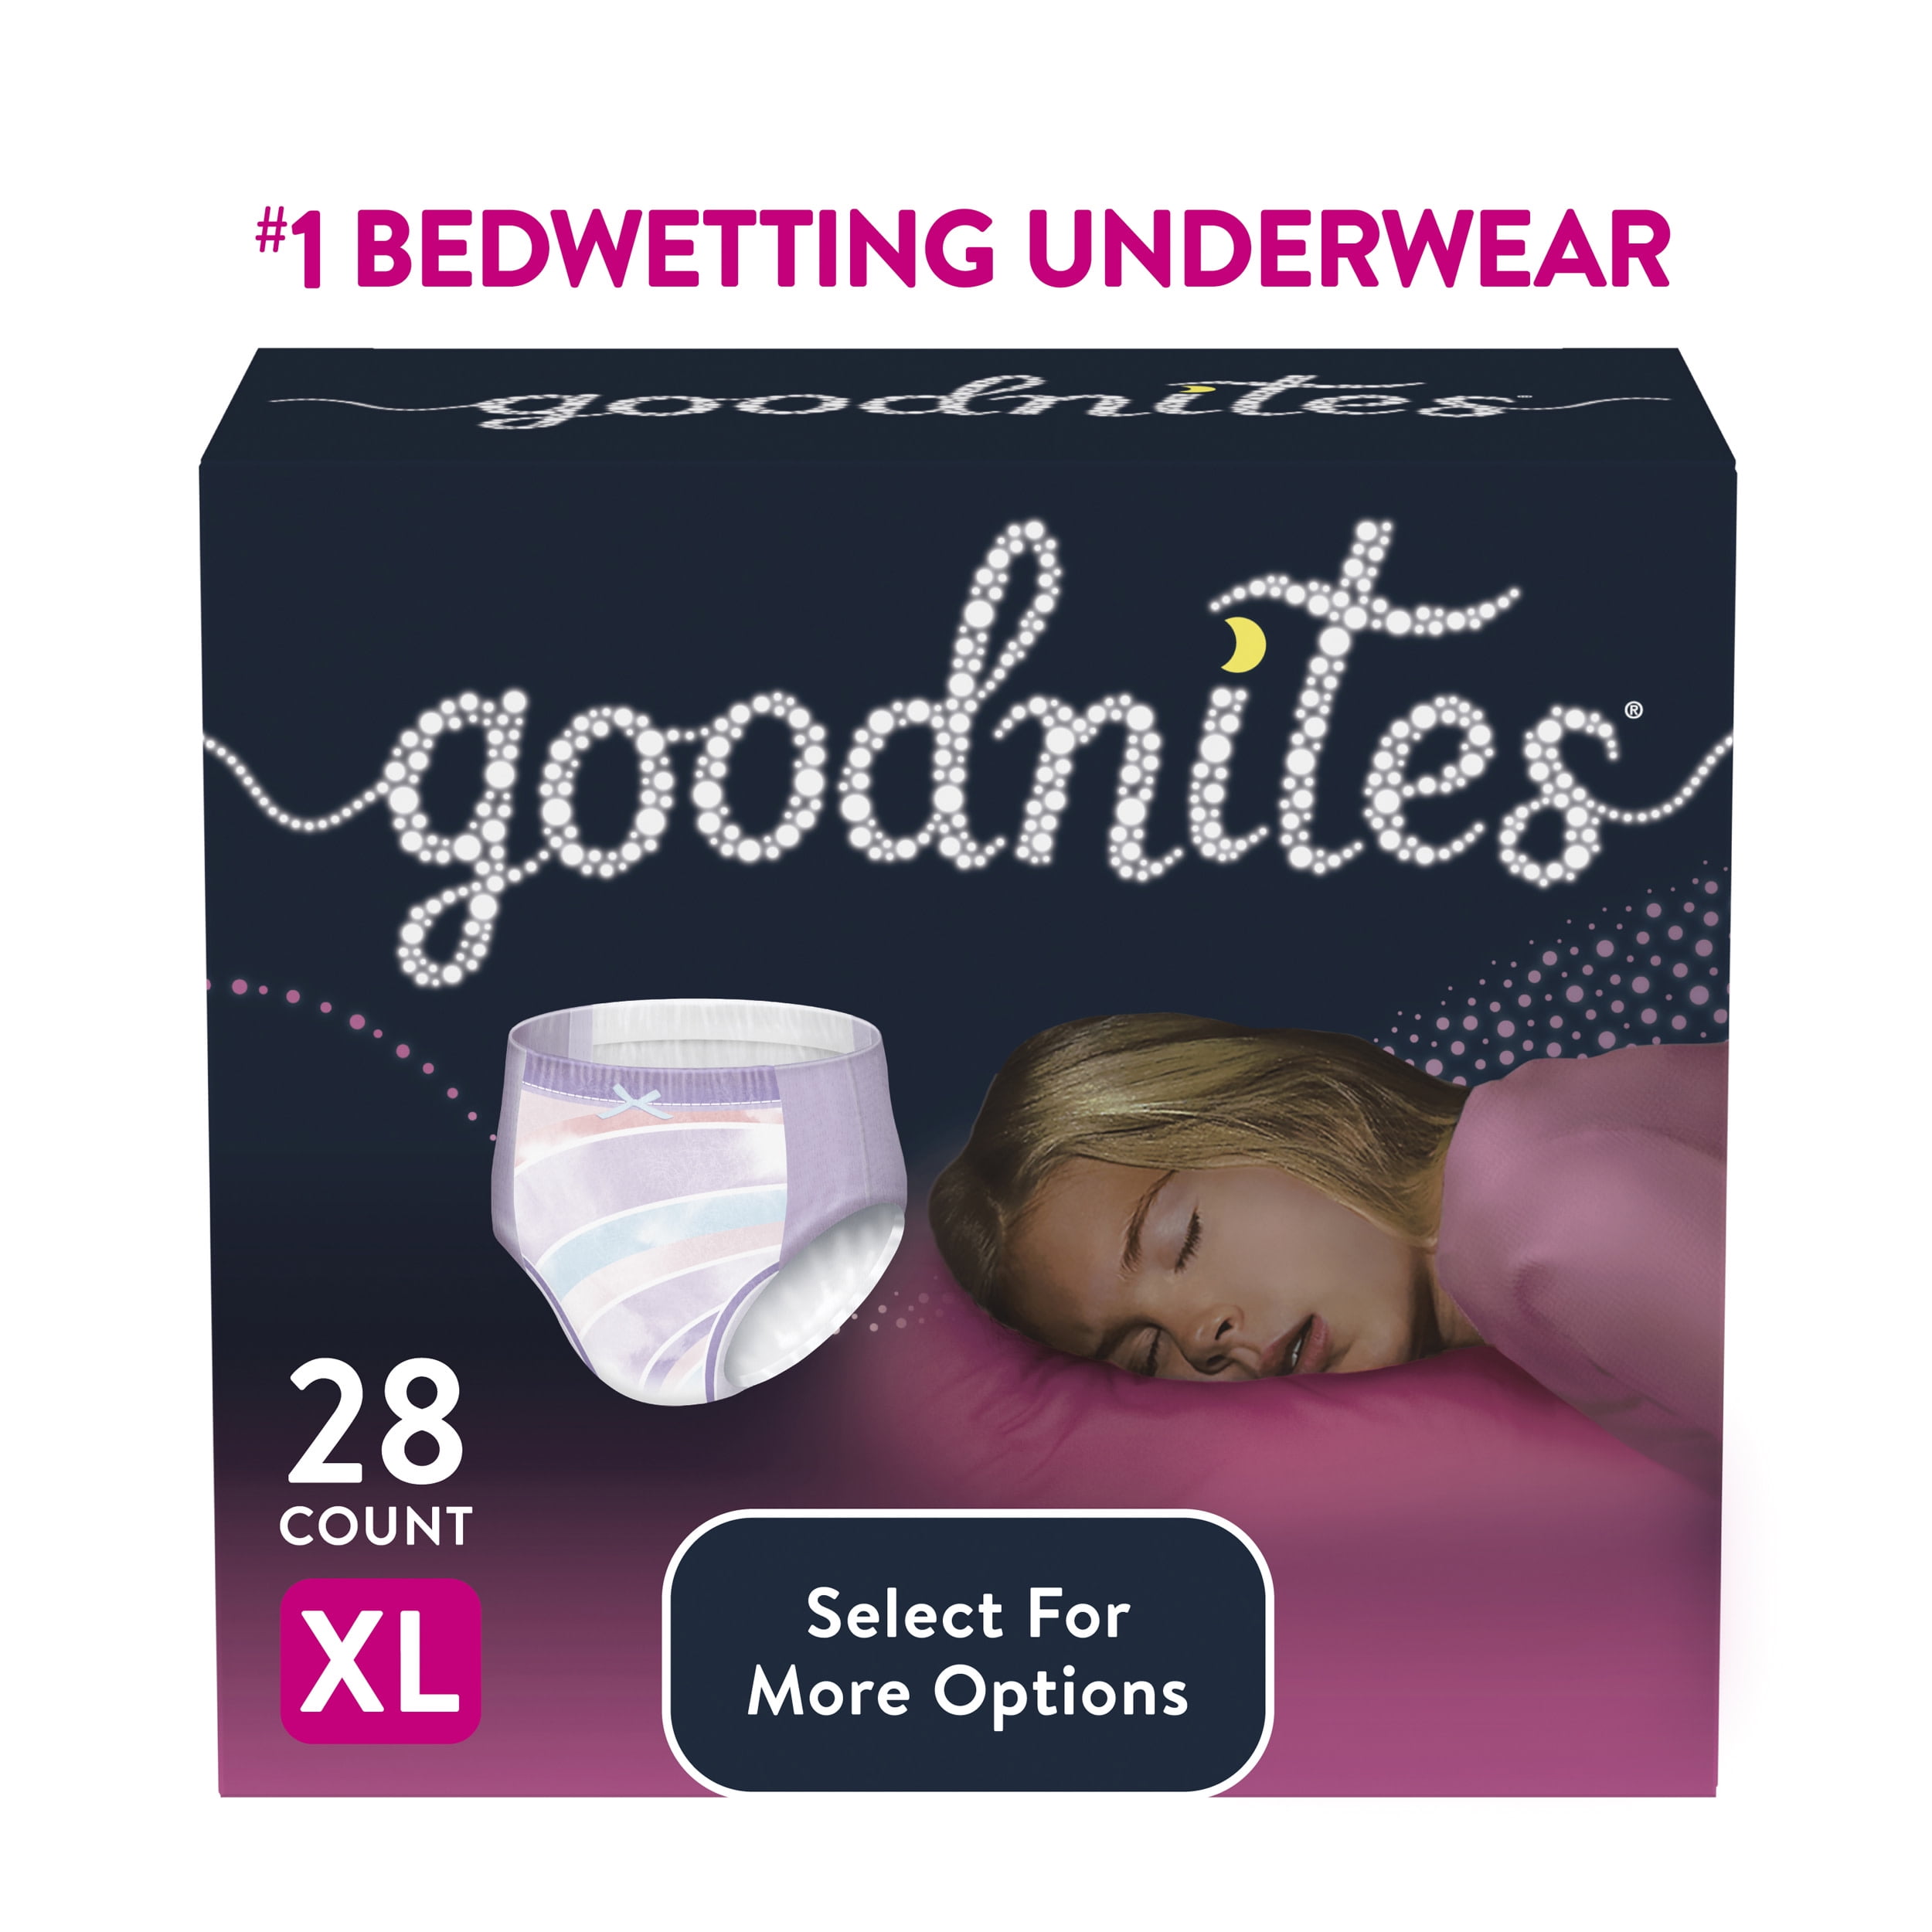 Girls' Nighttime Bedwetting Underwear, 99 Diapers - Foods Co.